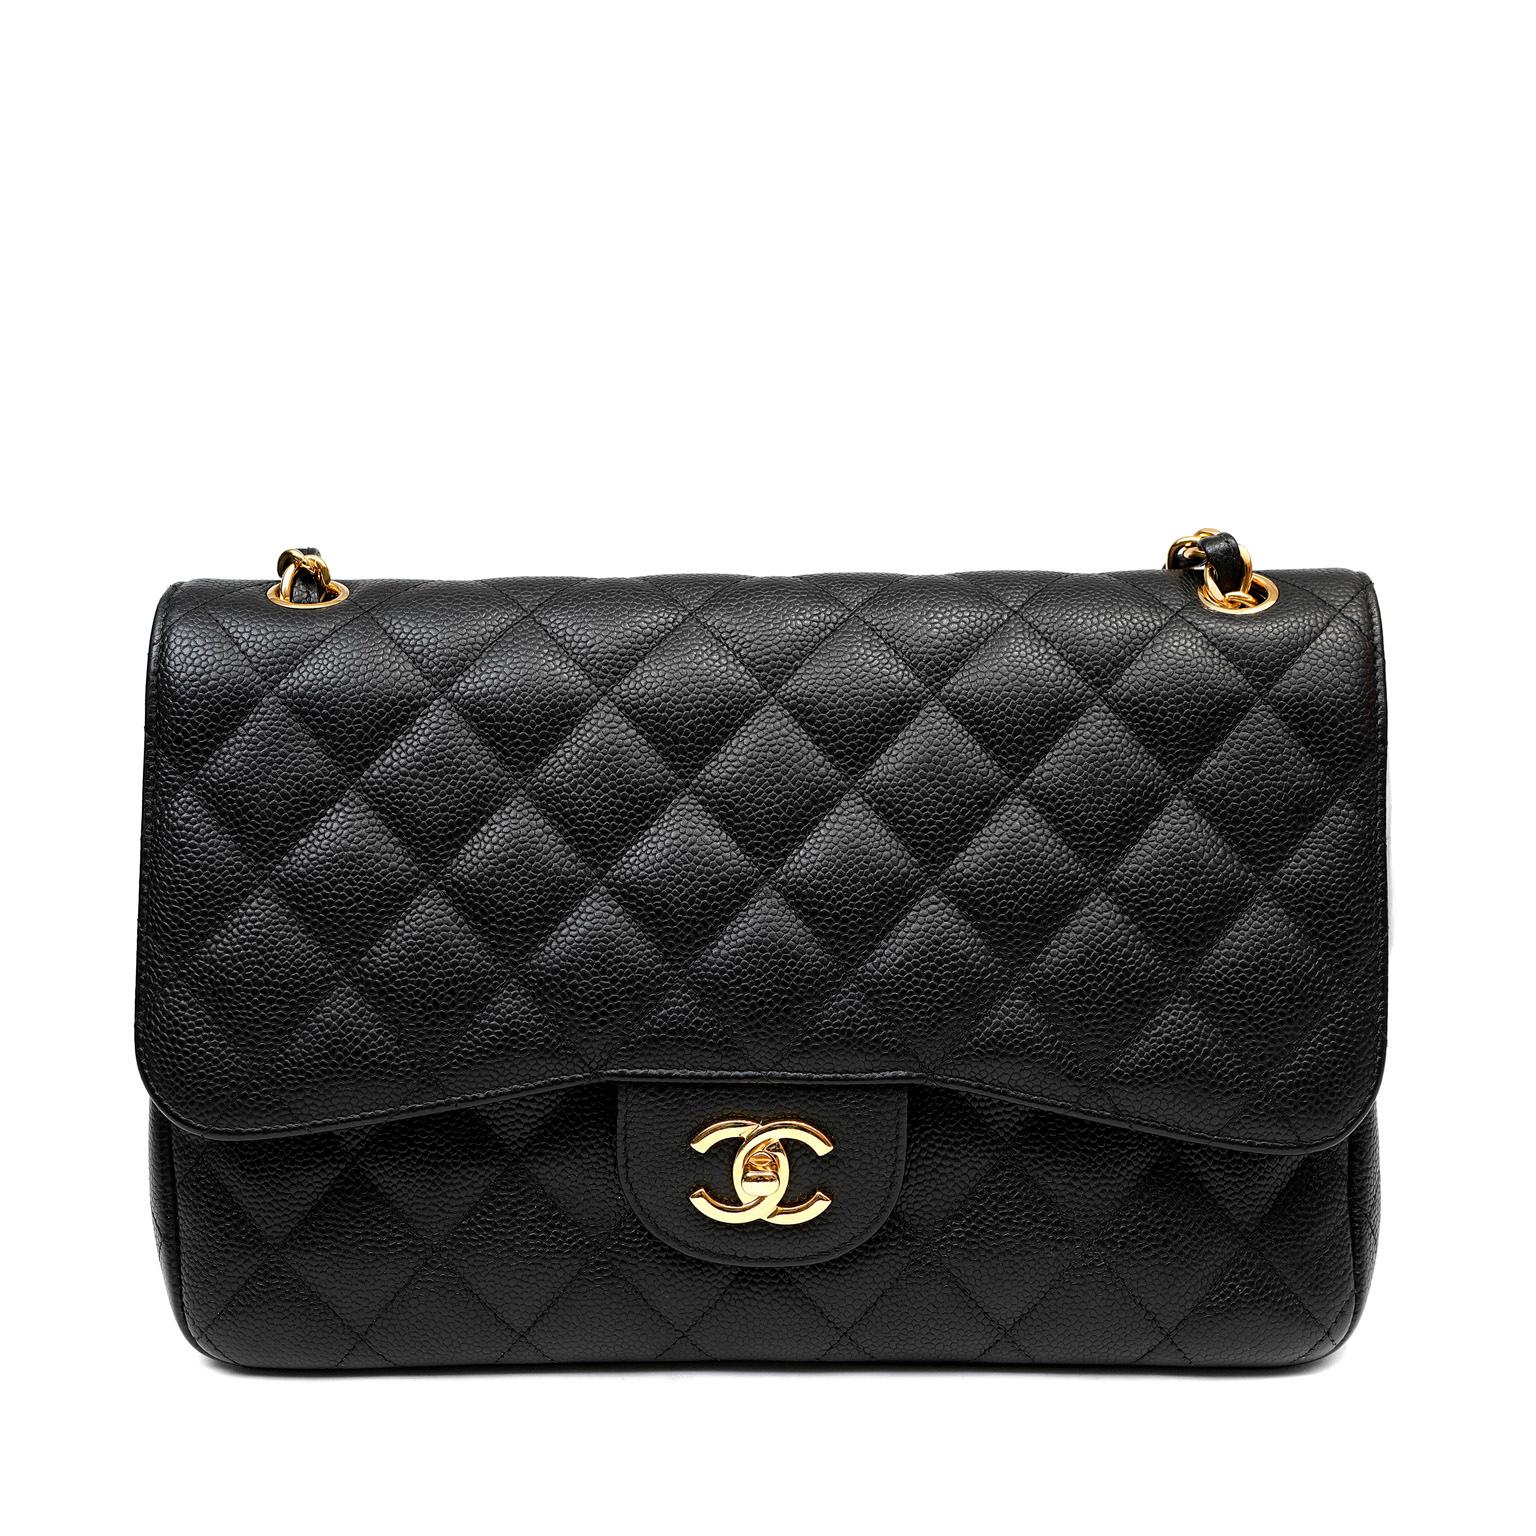 This authentic Chanel Black Caviar Jumbo Classic Flap Bag is in pristine unworn condition.  A key piece in any sophisticated wardrobe, the Jumbo Classic in black caviar with gold hardware is one of the most sought-after Chanel styles